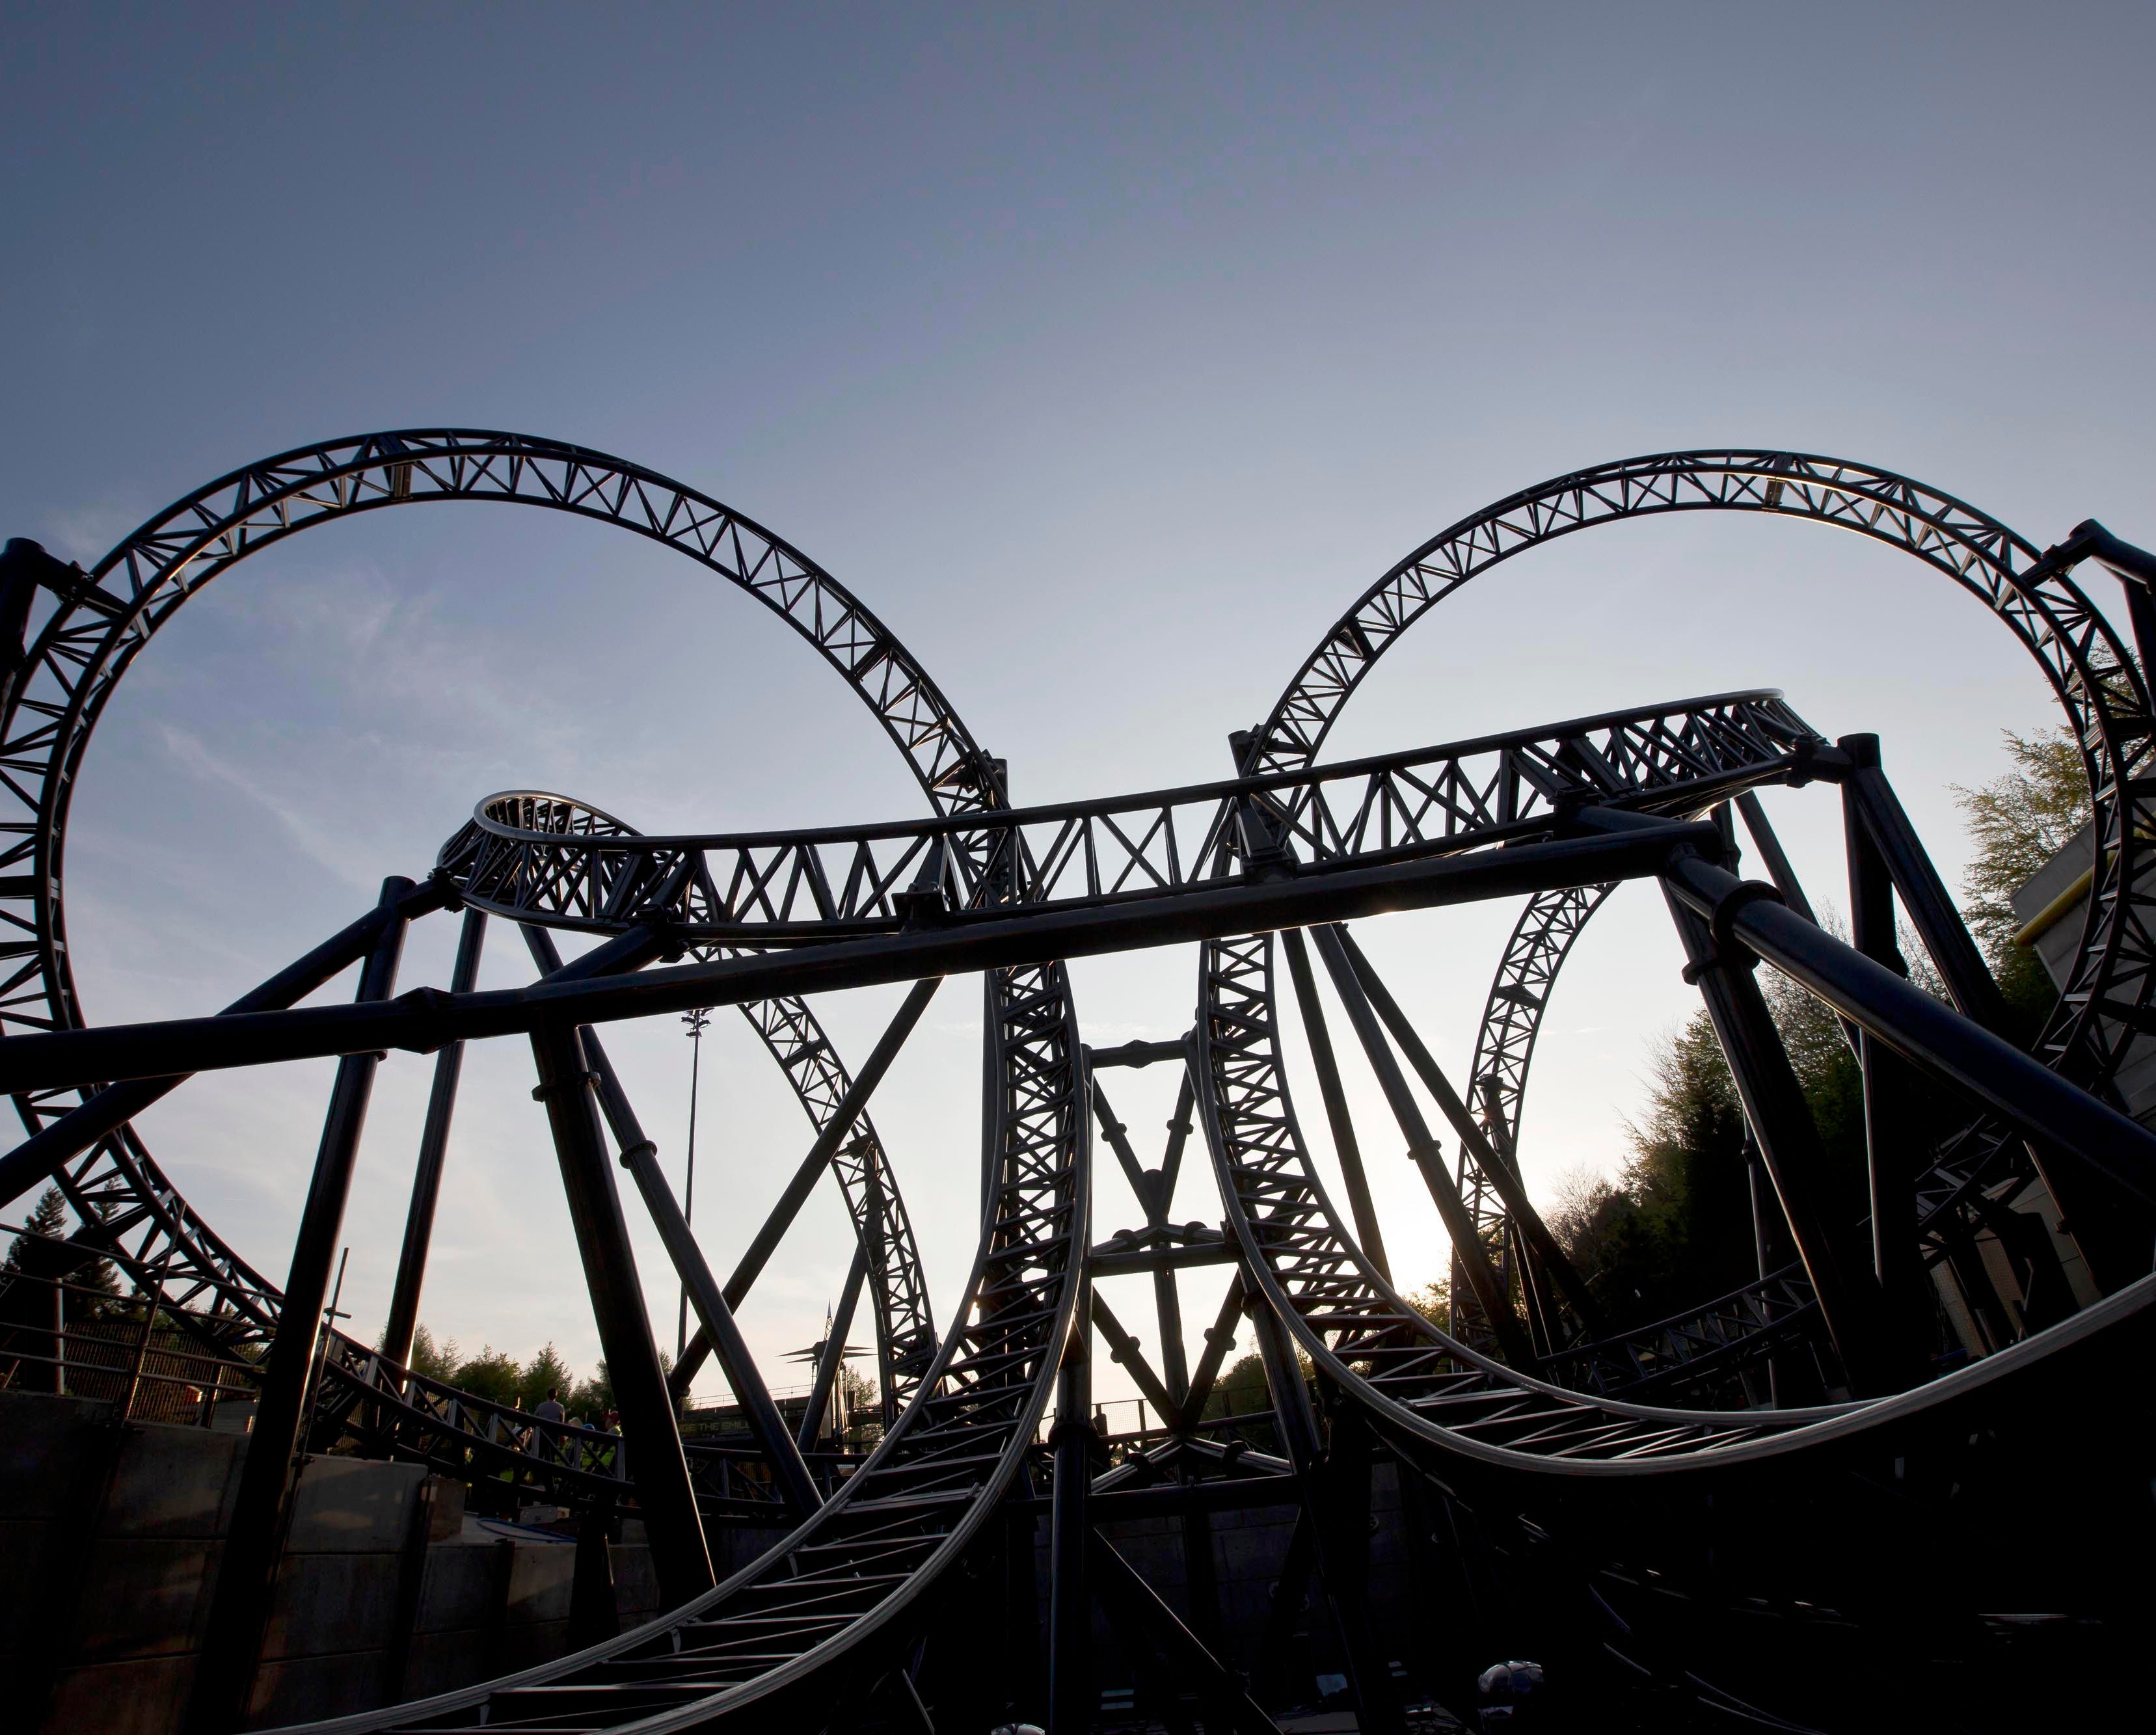 The Smiler ride has been closed since the accident